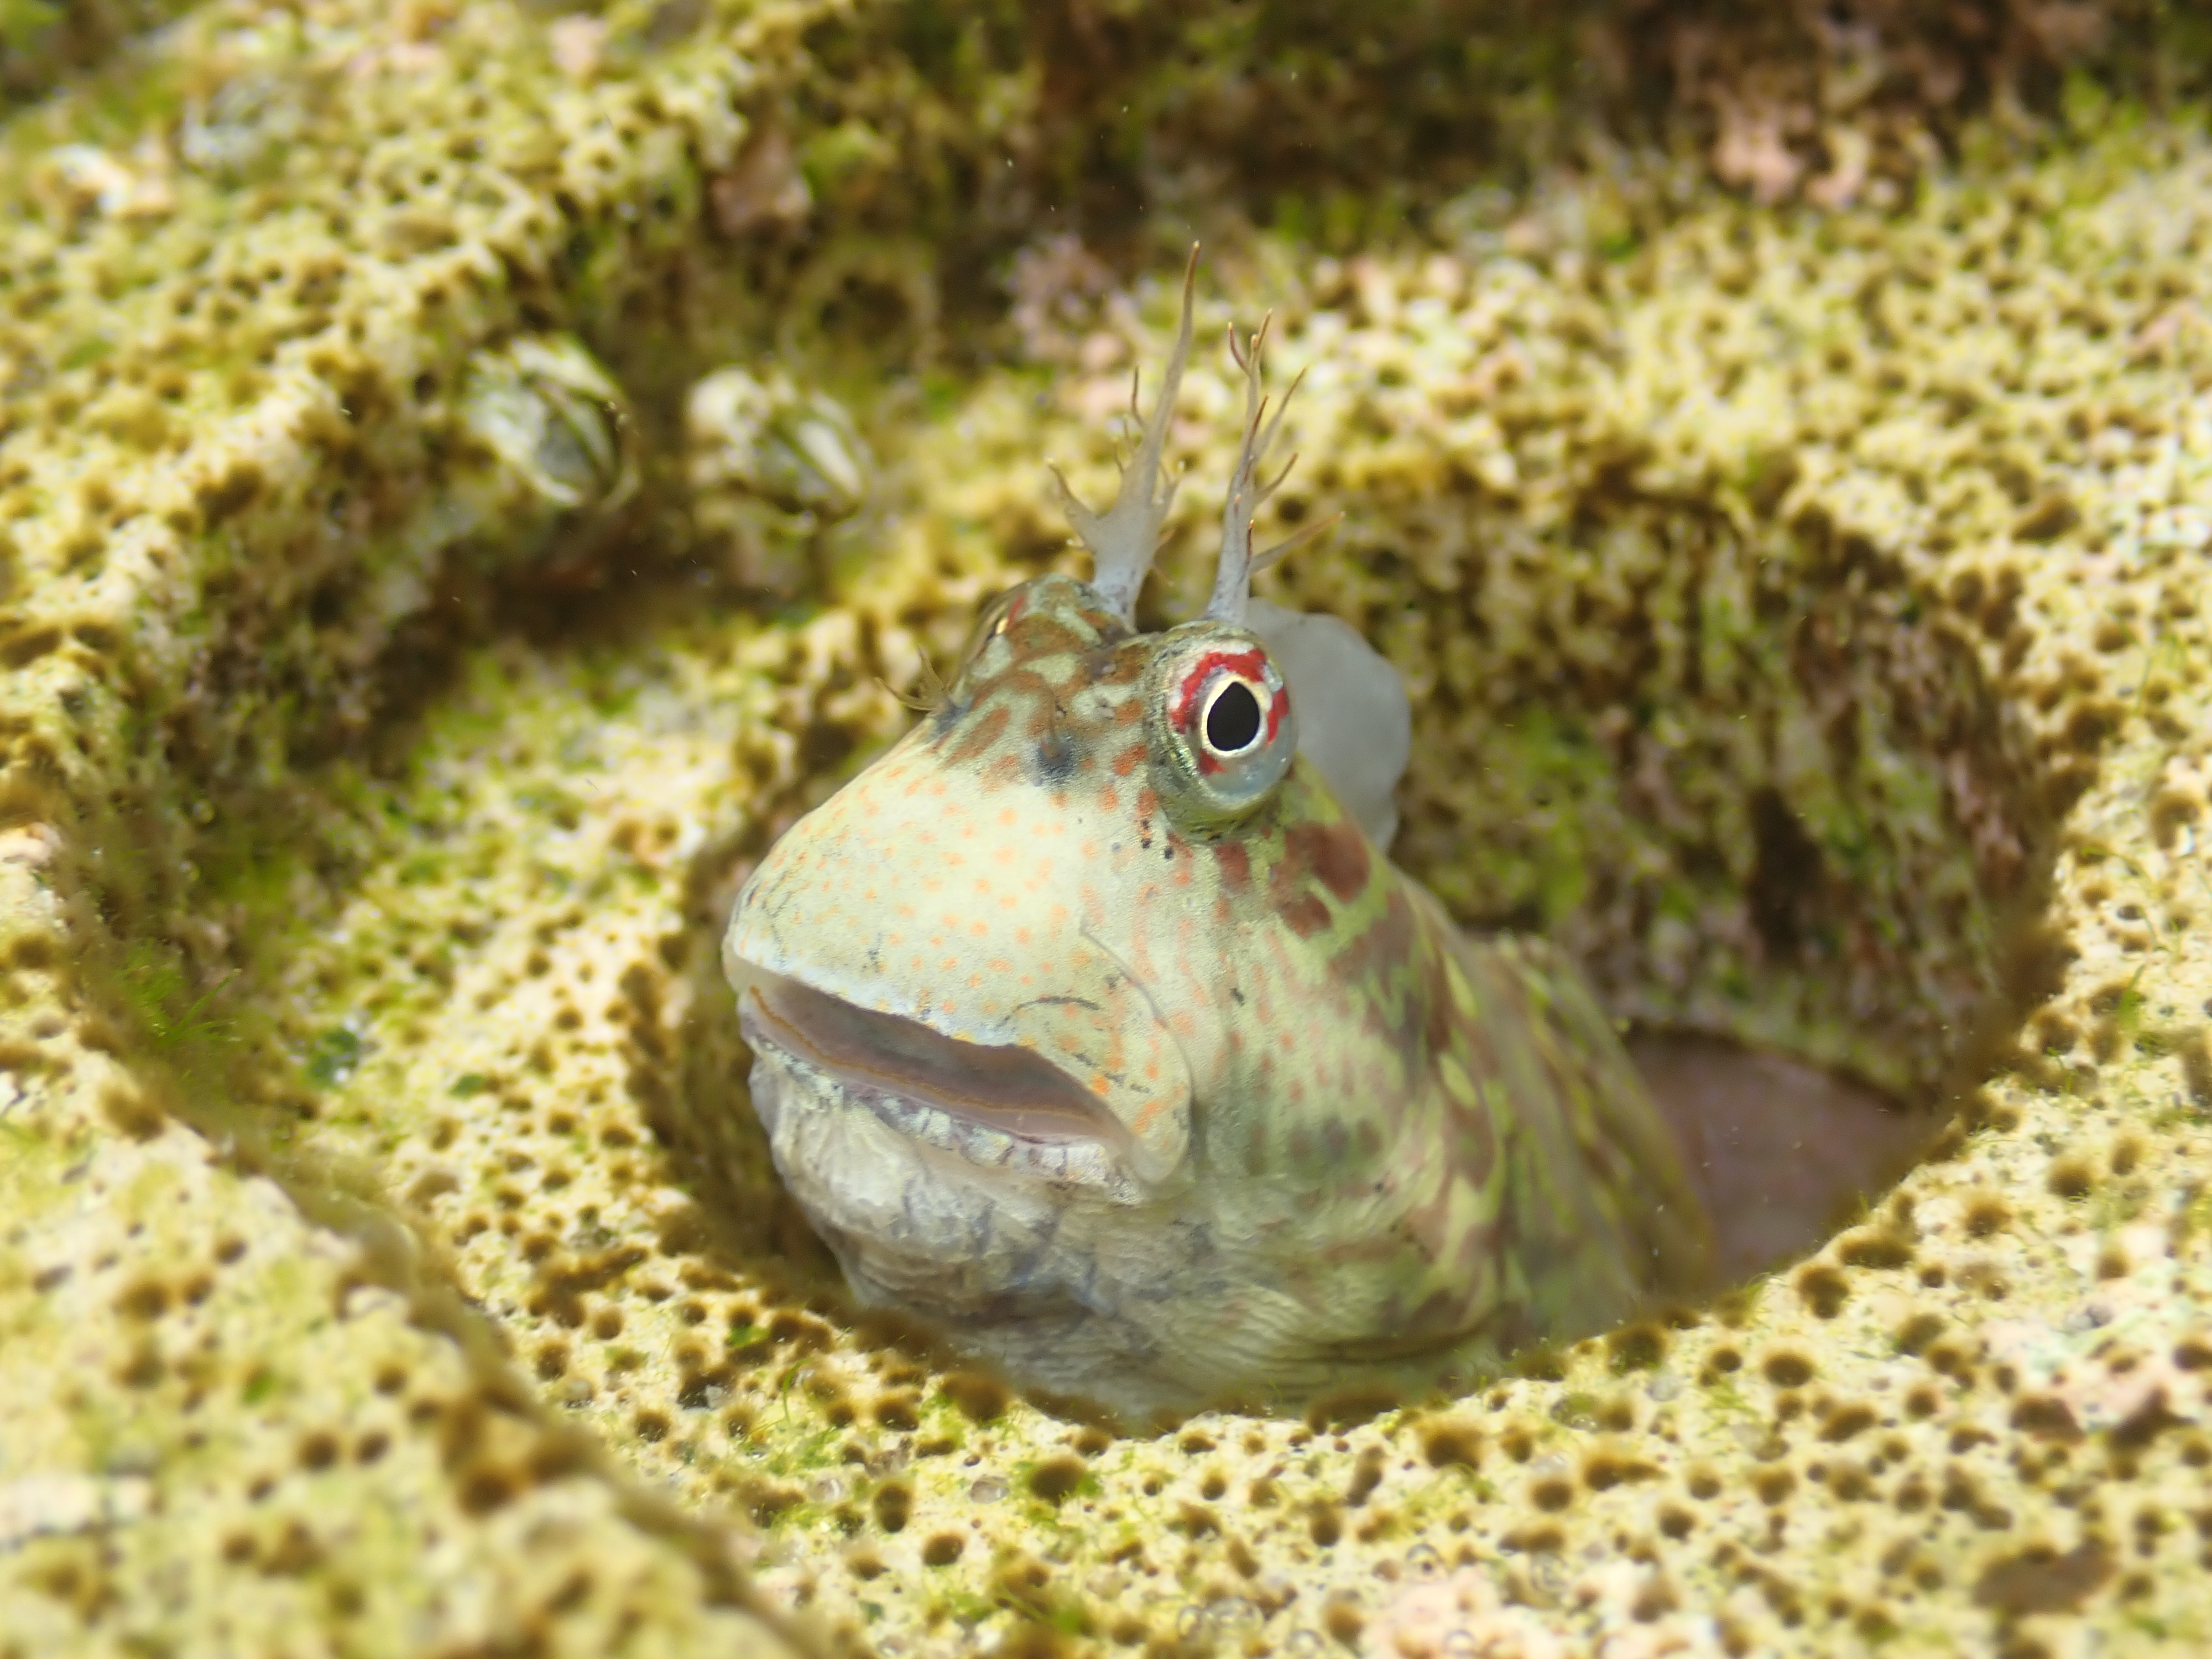 Blenny fish loves the hole of our eco-fixture